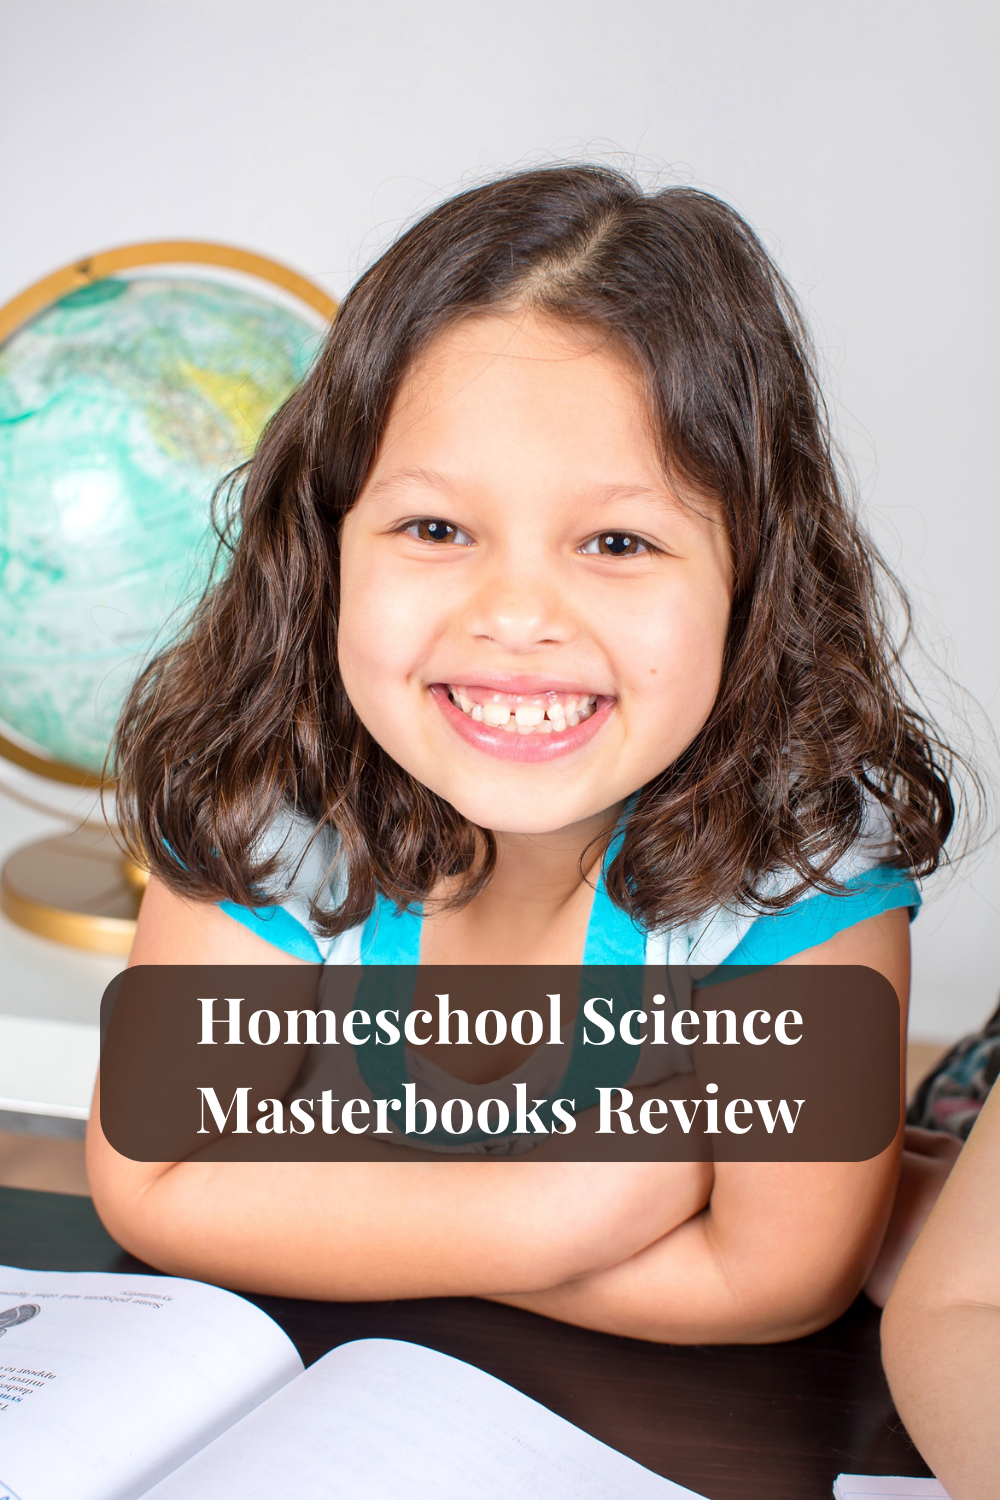 My review of the Masterbooks curriculum God's Design series for our homeschool science books after 4 years of using it.